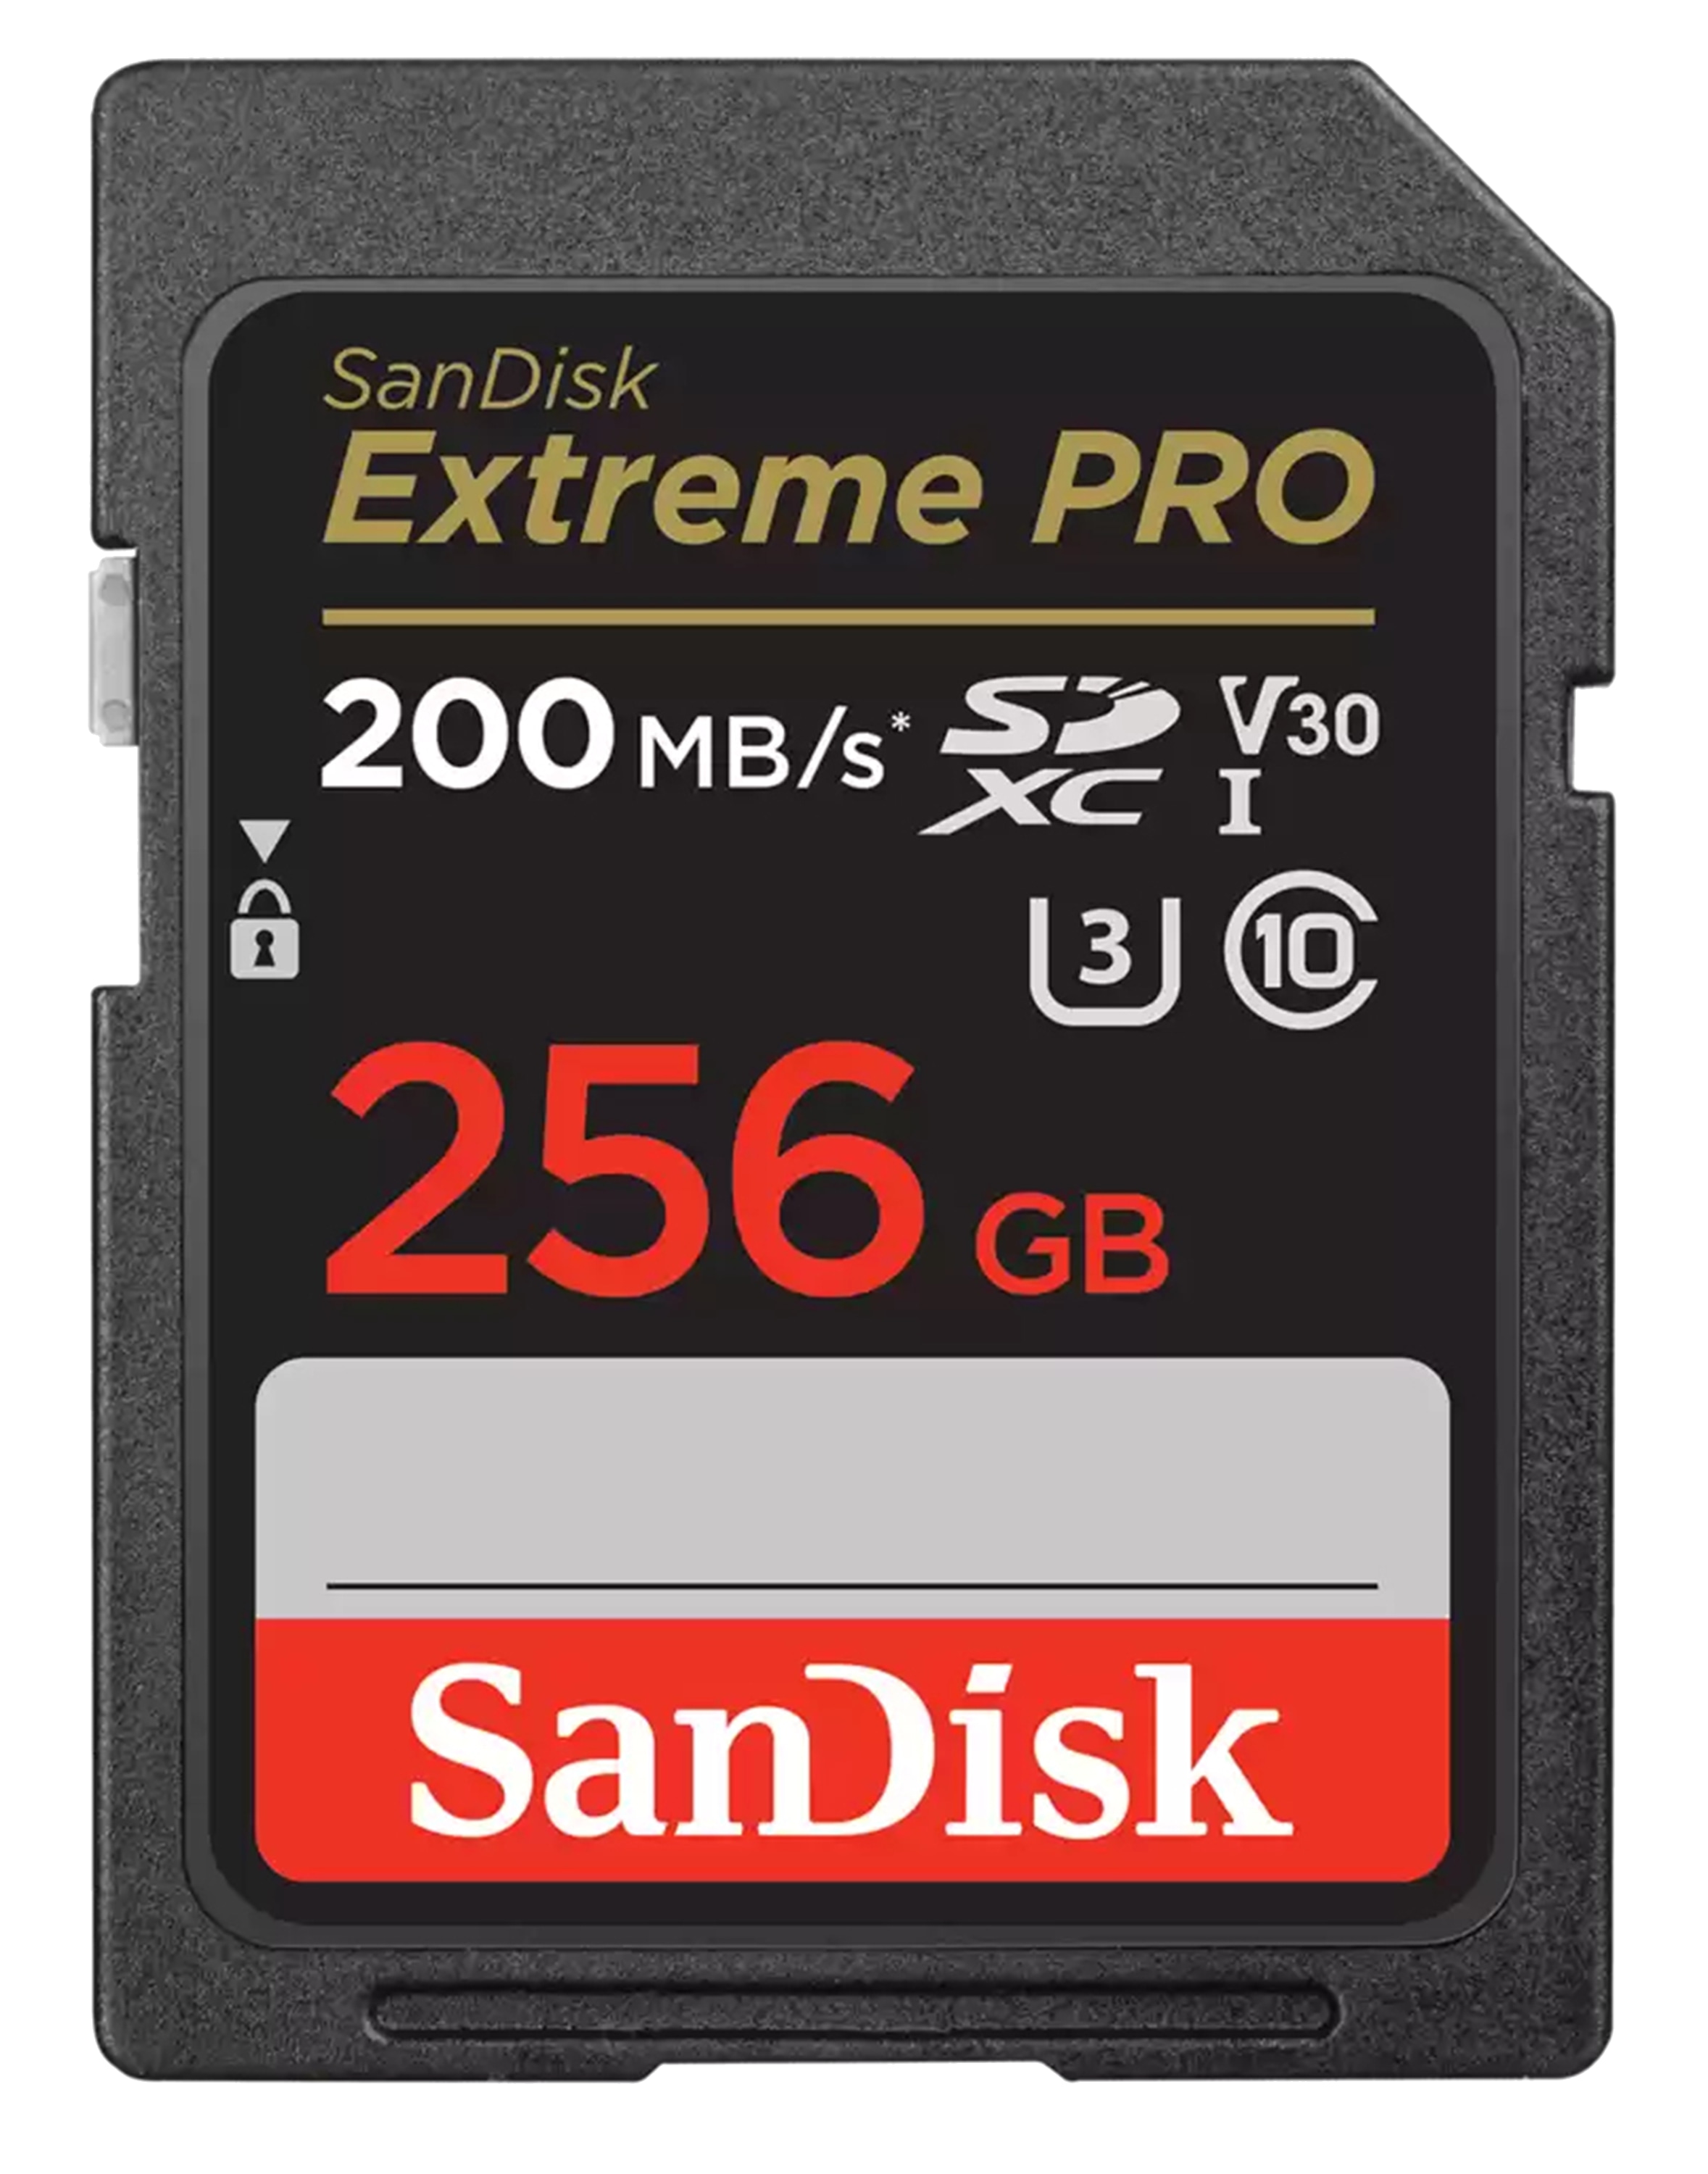 SANDISK SD-Card Extreme Pro 256GB